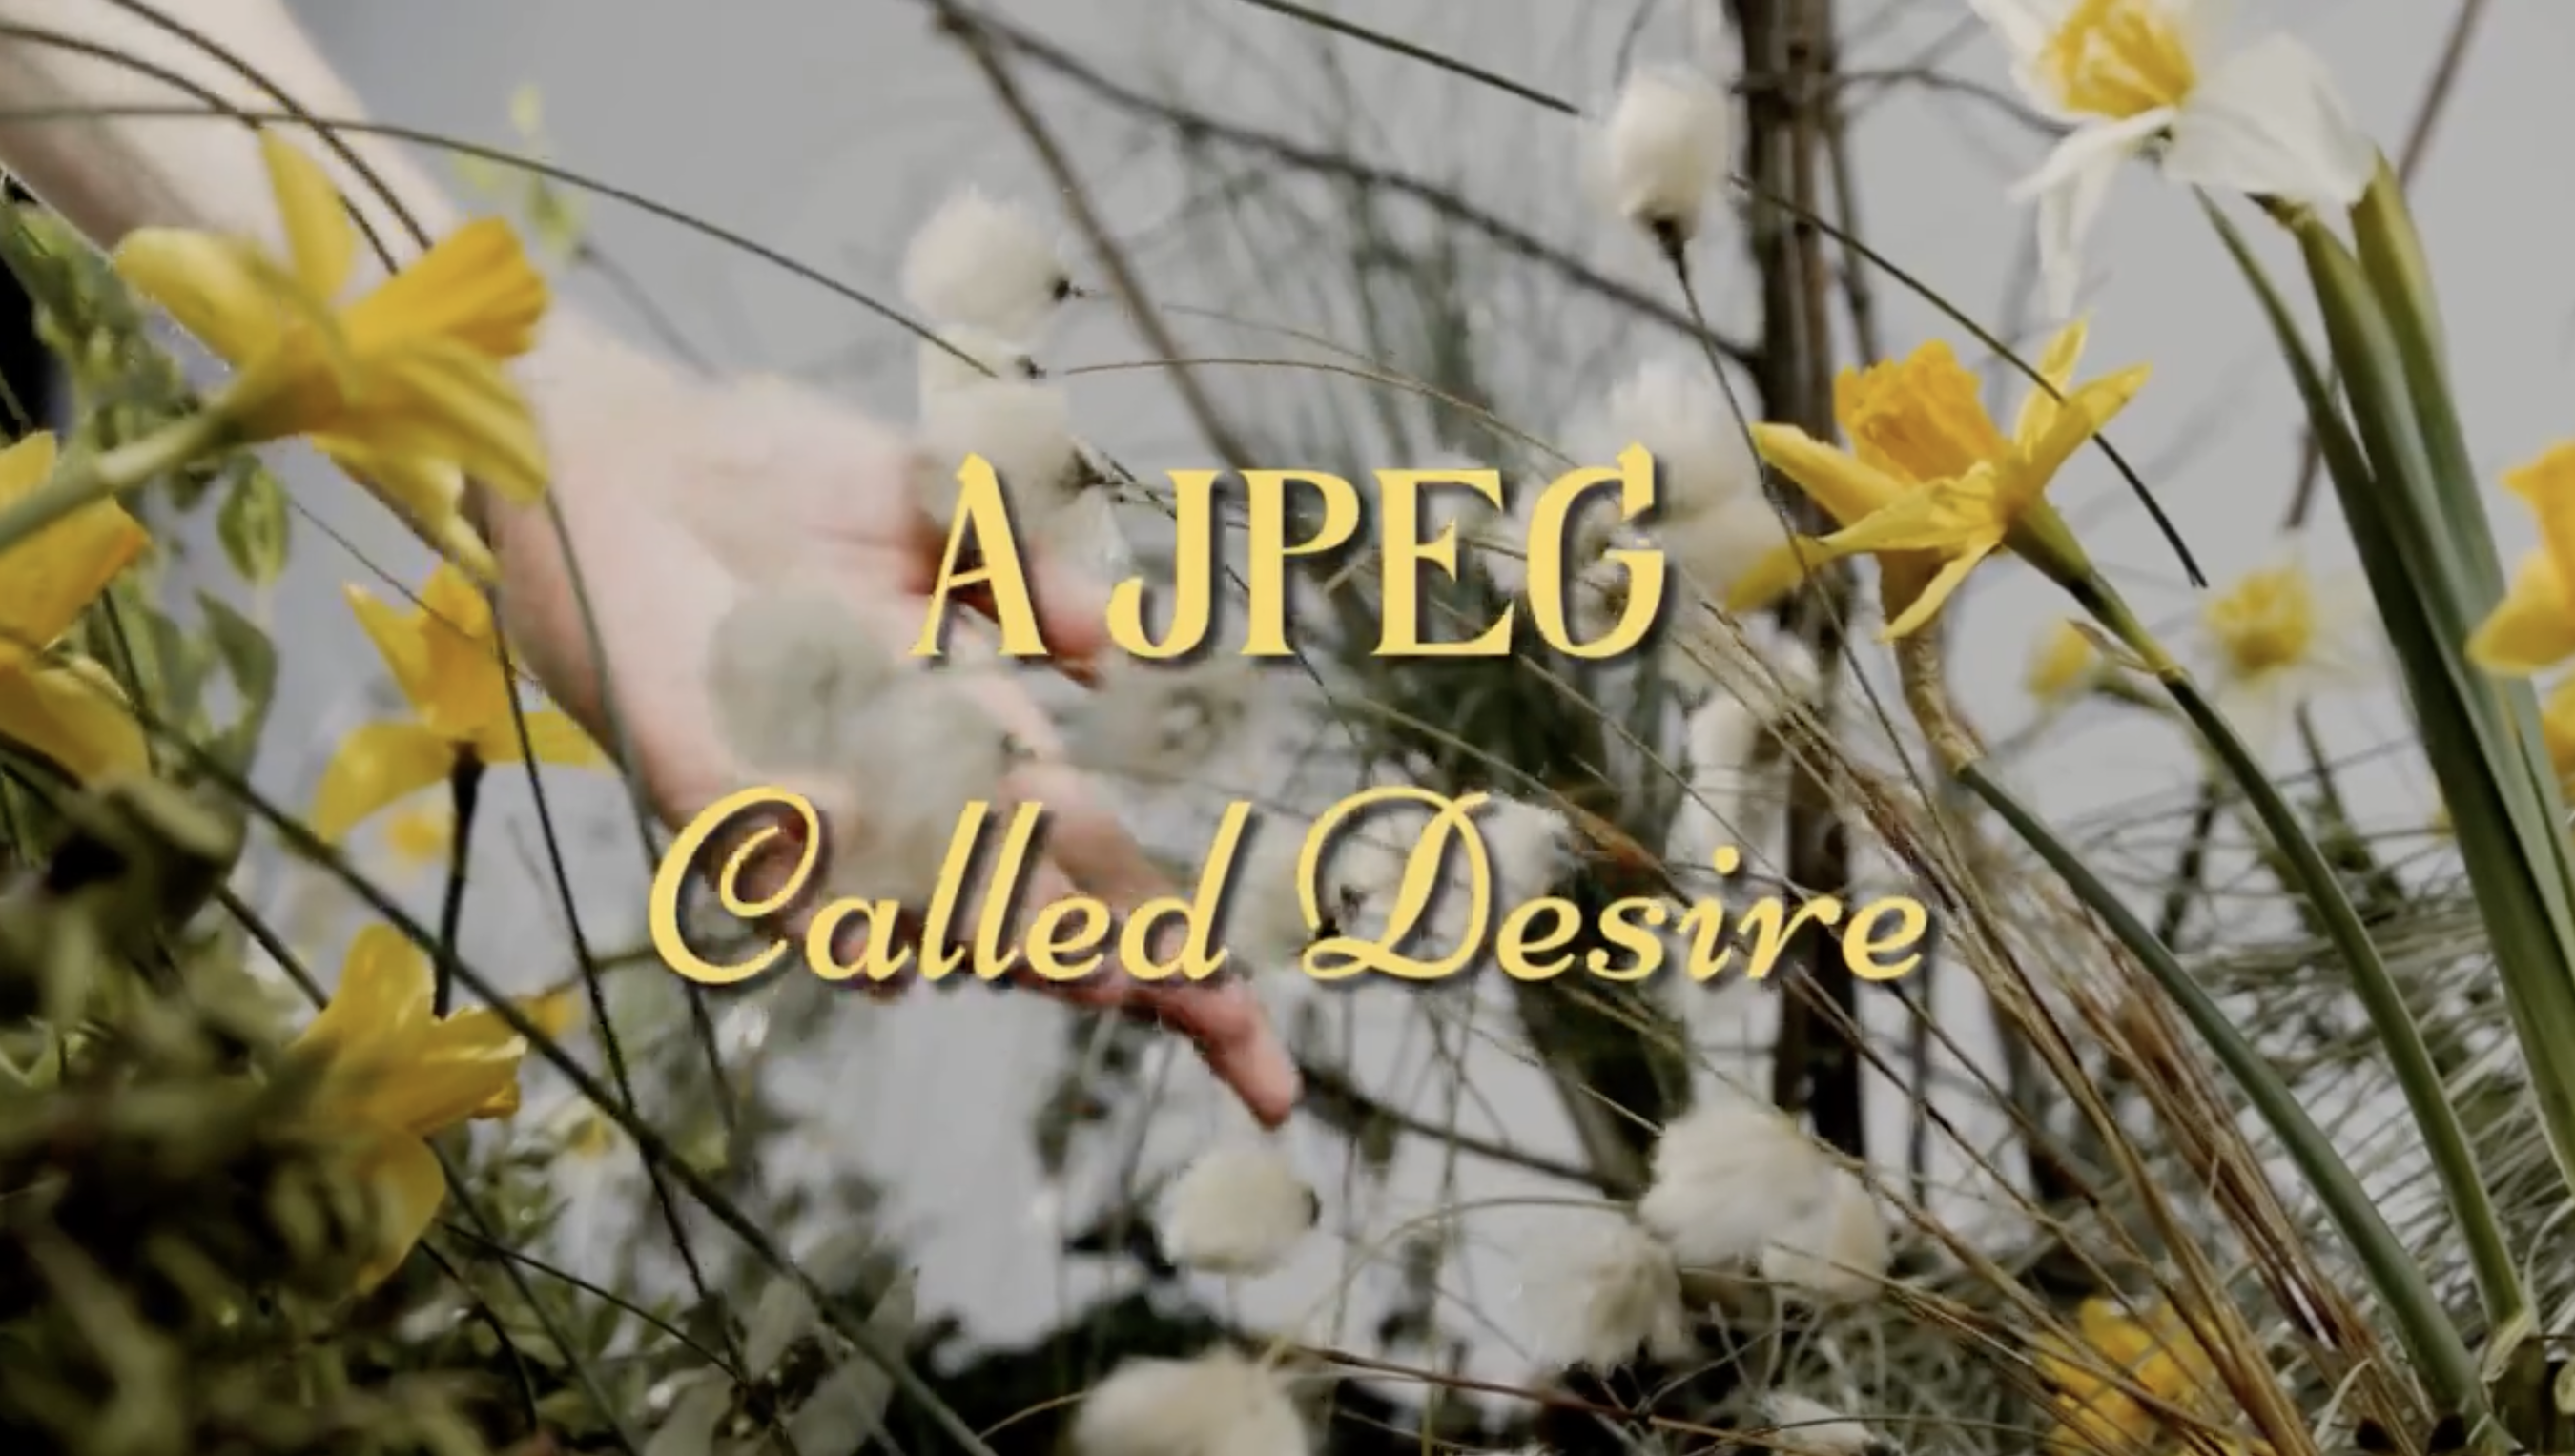 THE STORY OF BEING HUMAN: “A JPEG CALLED DESIRE”